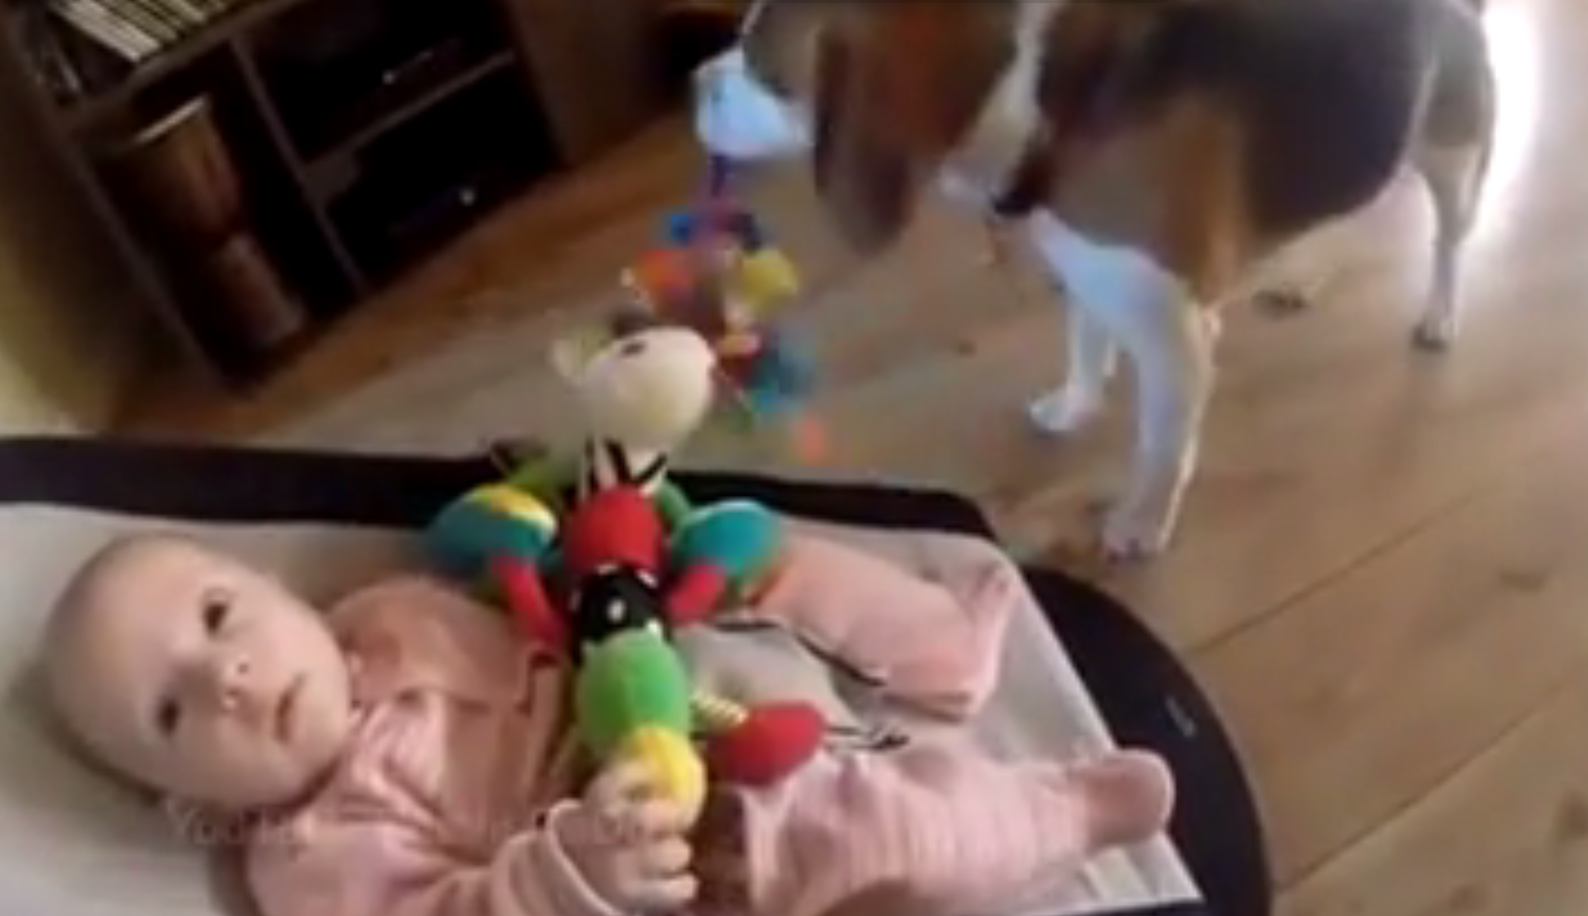 A dog robs a baby of her toy...